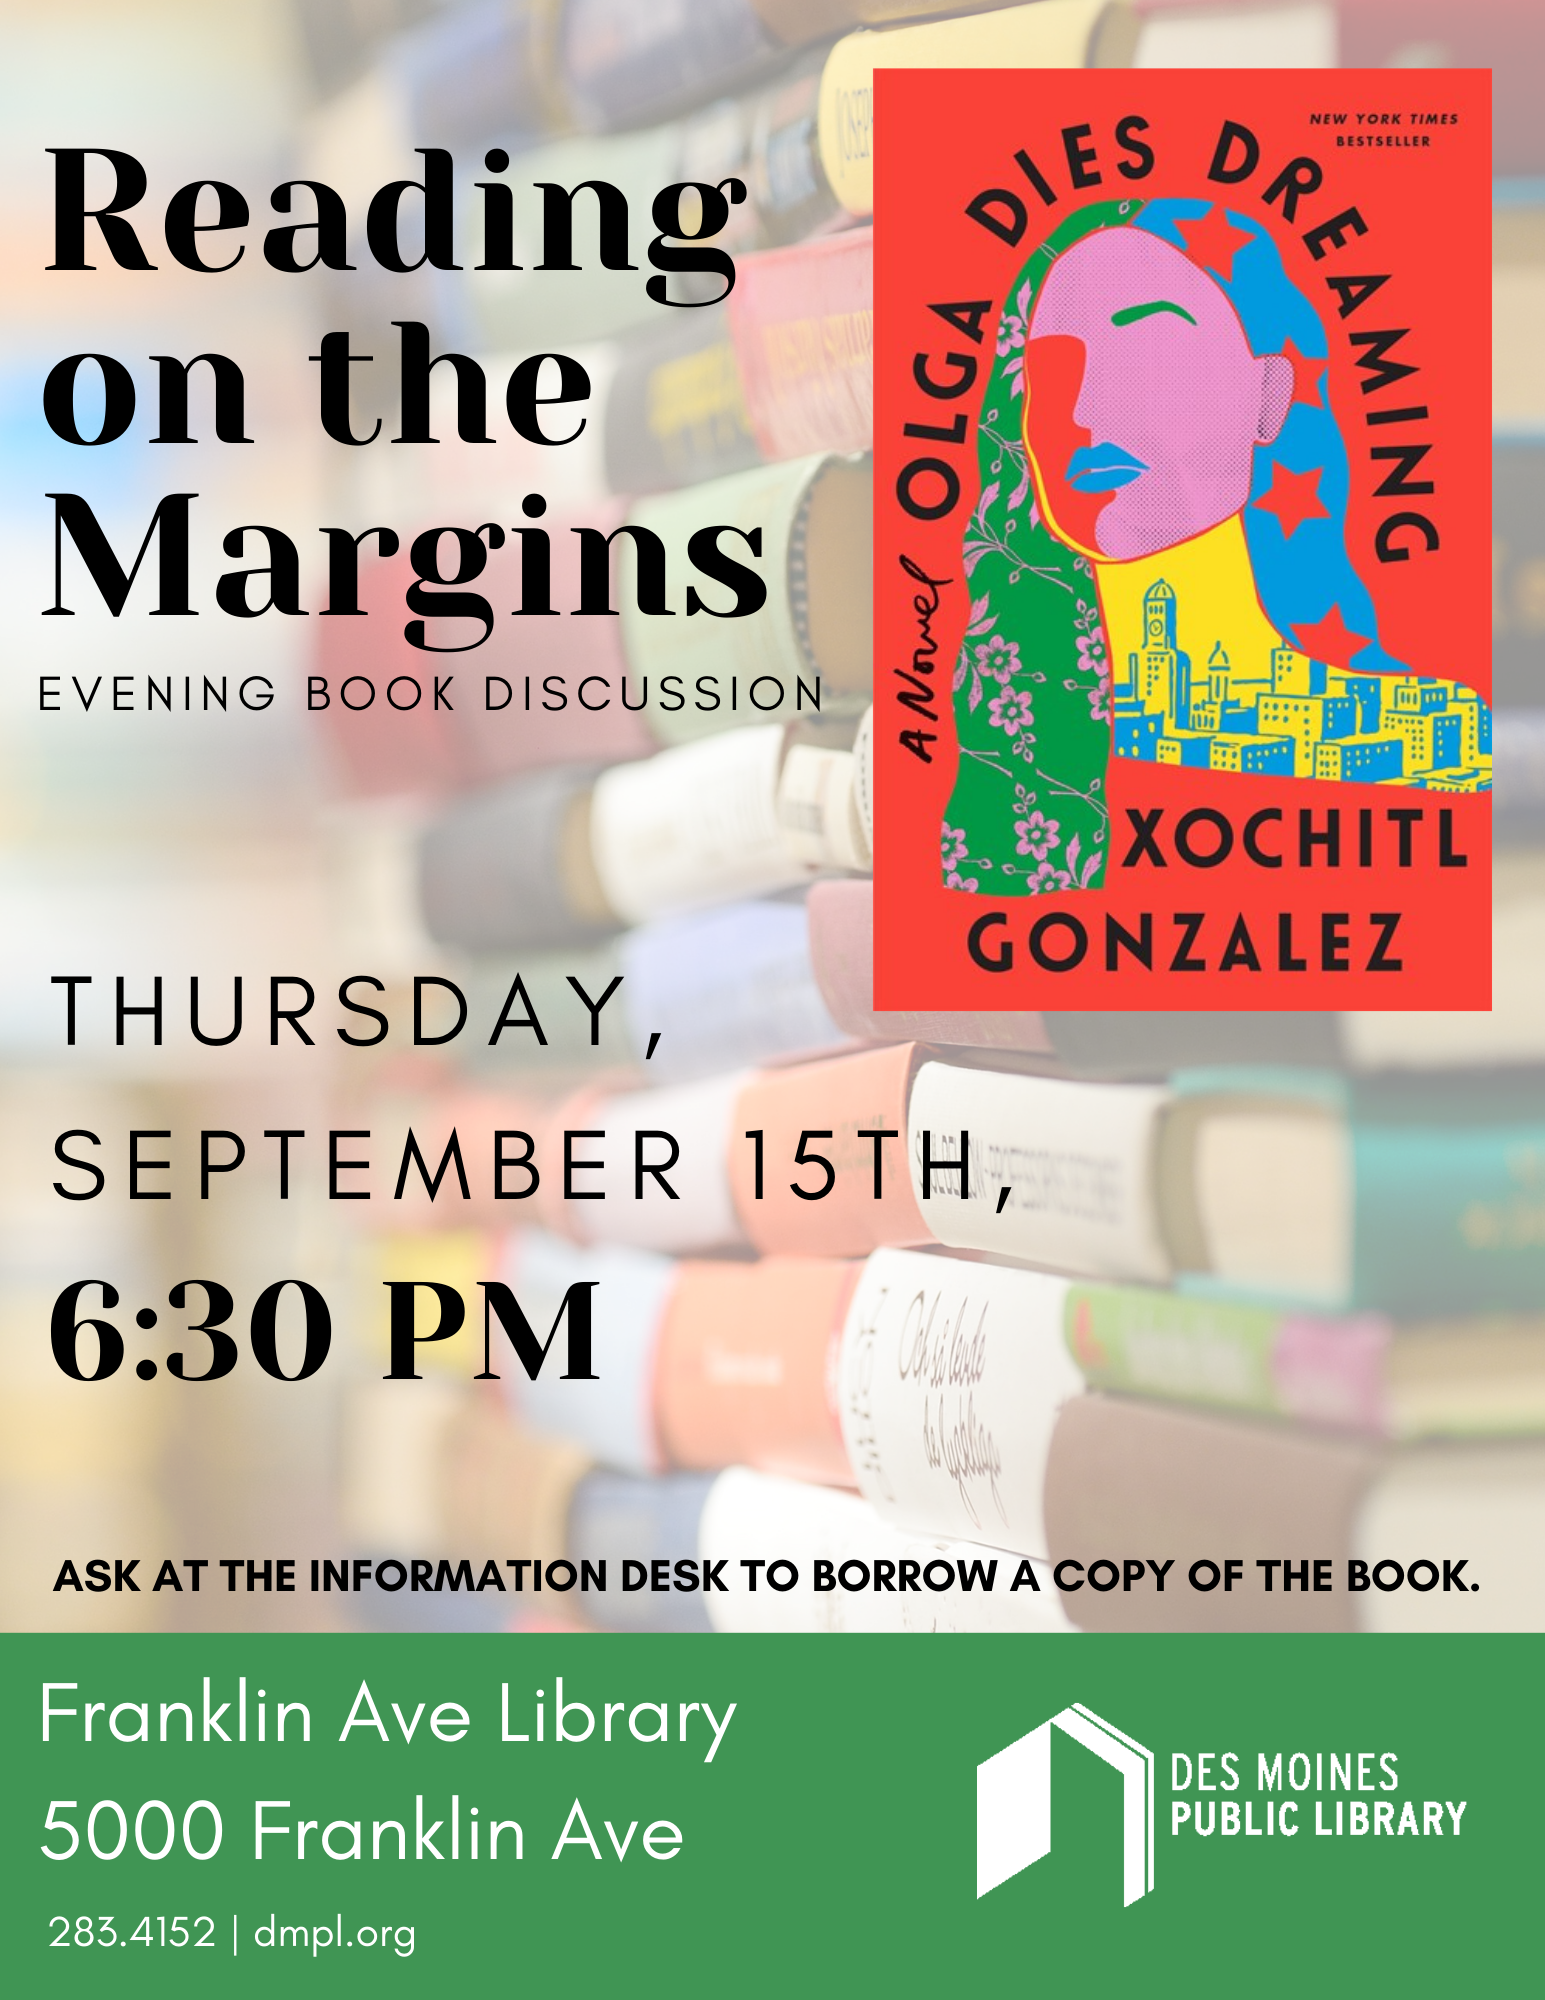 An image of the promotional poster for Reading on the Margins.